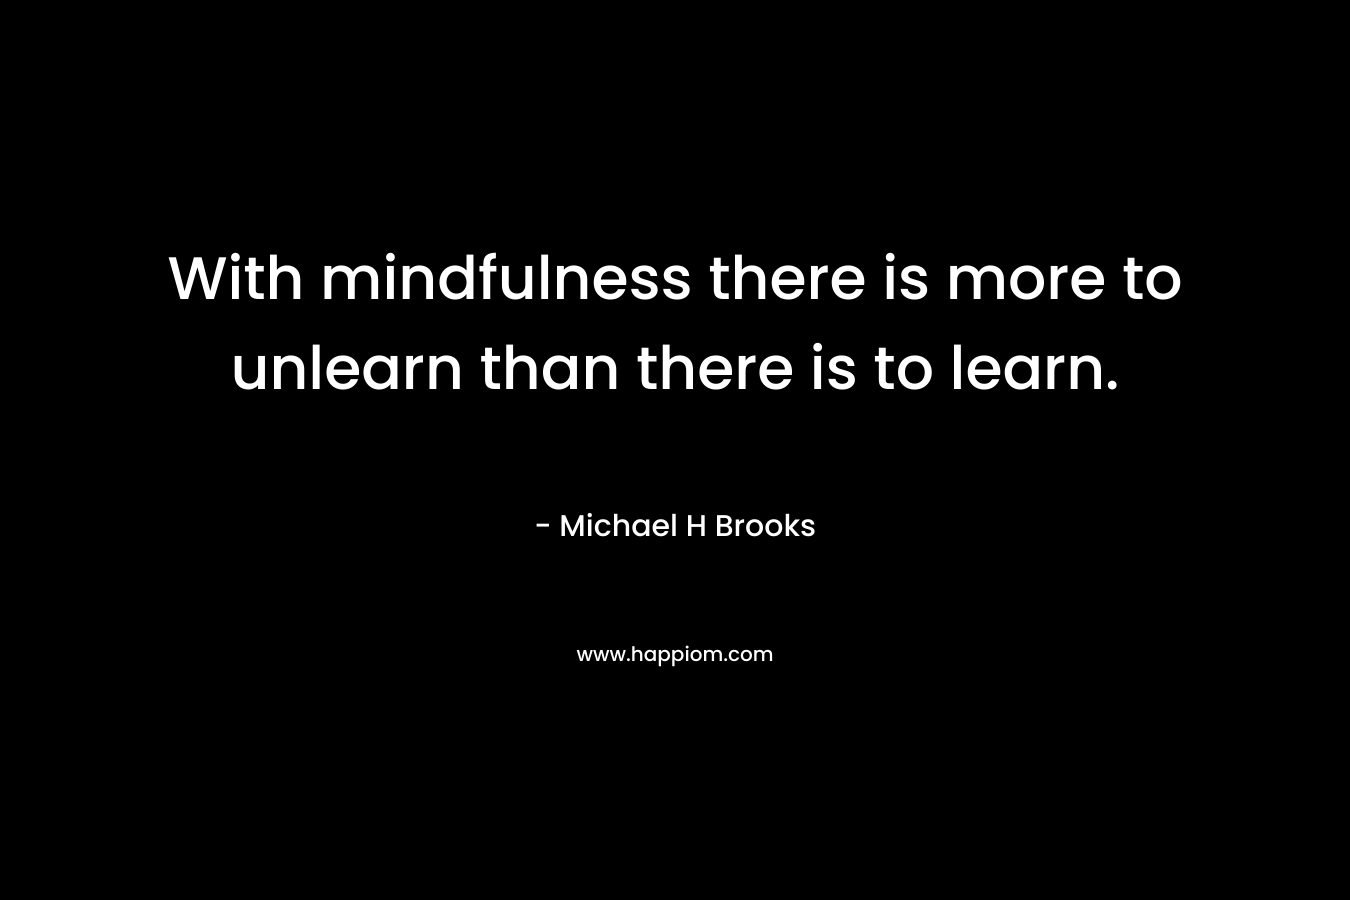 With mindfulness there is more to unlearn than there is to learn.